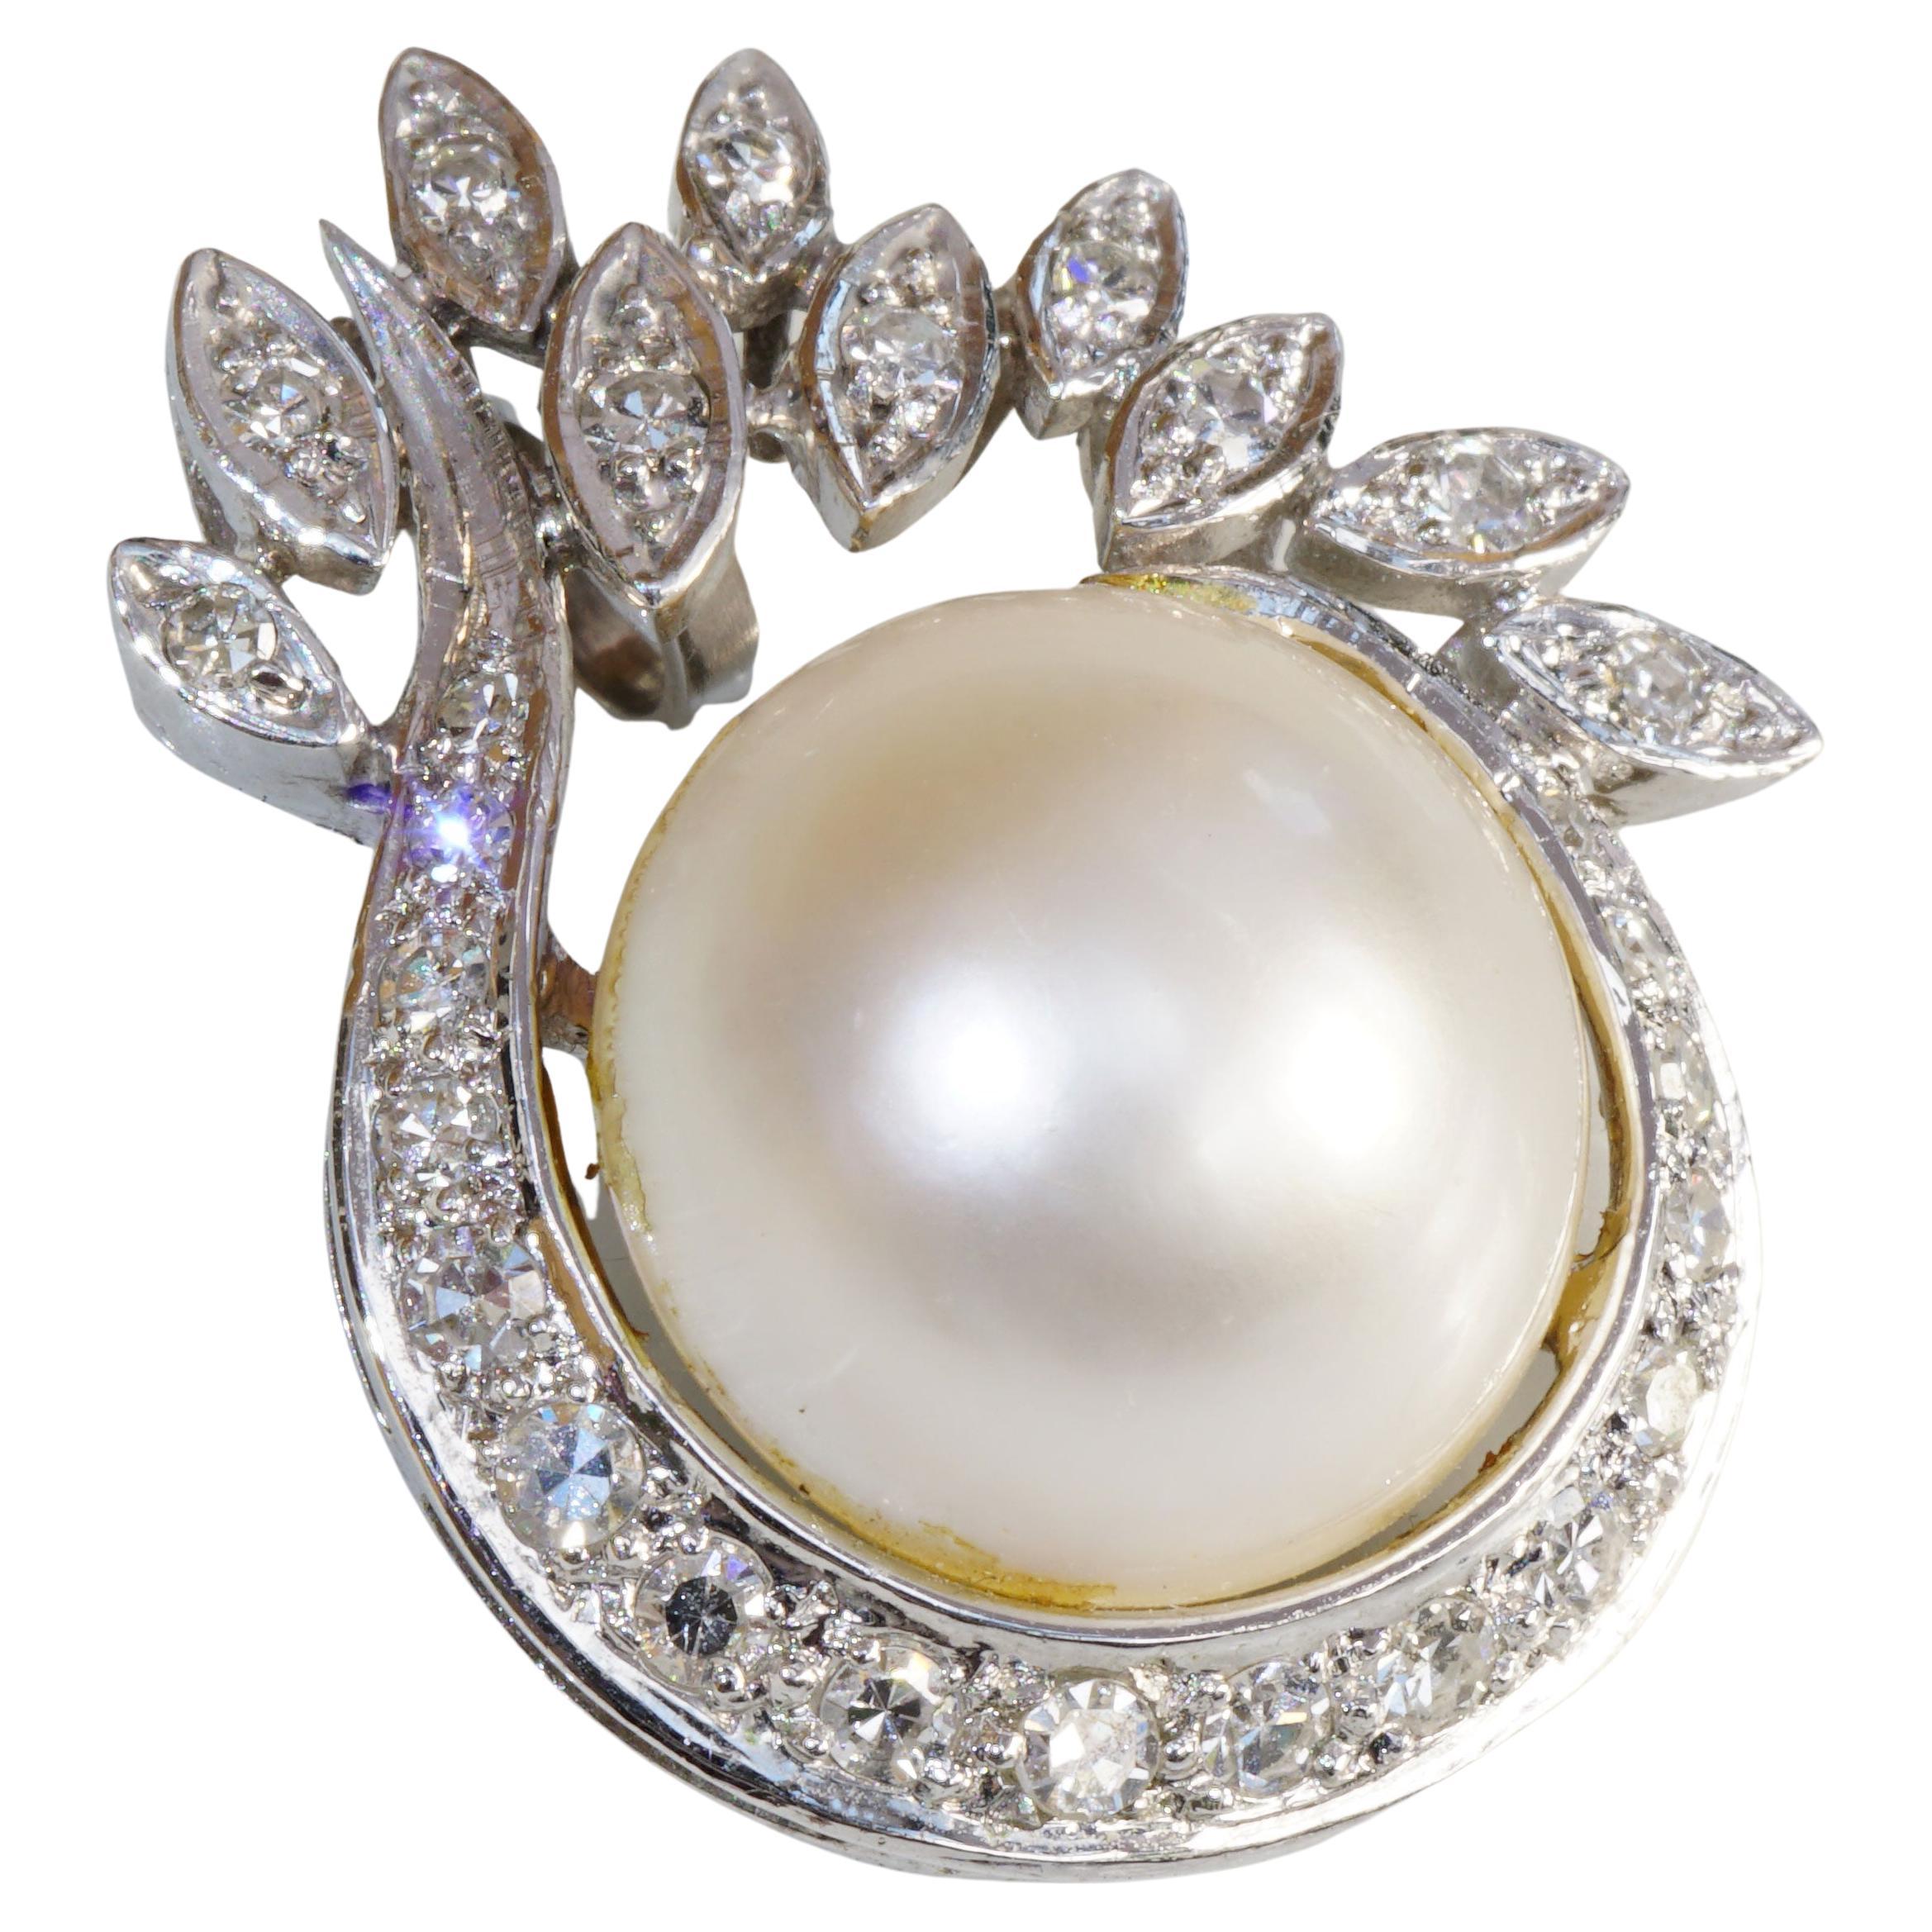 Mabe Pearl Brilliant Pendant White Gold 0.60 ct TW VS 27 x 22 mm large Eyelet